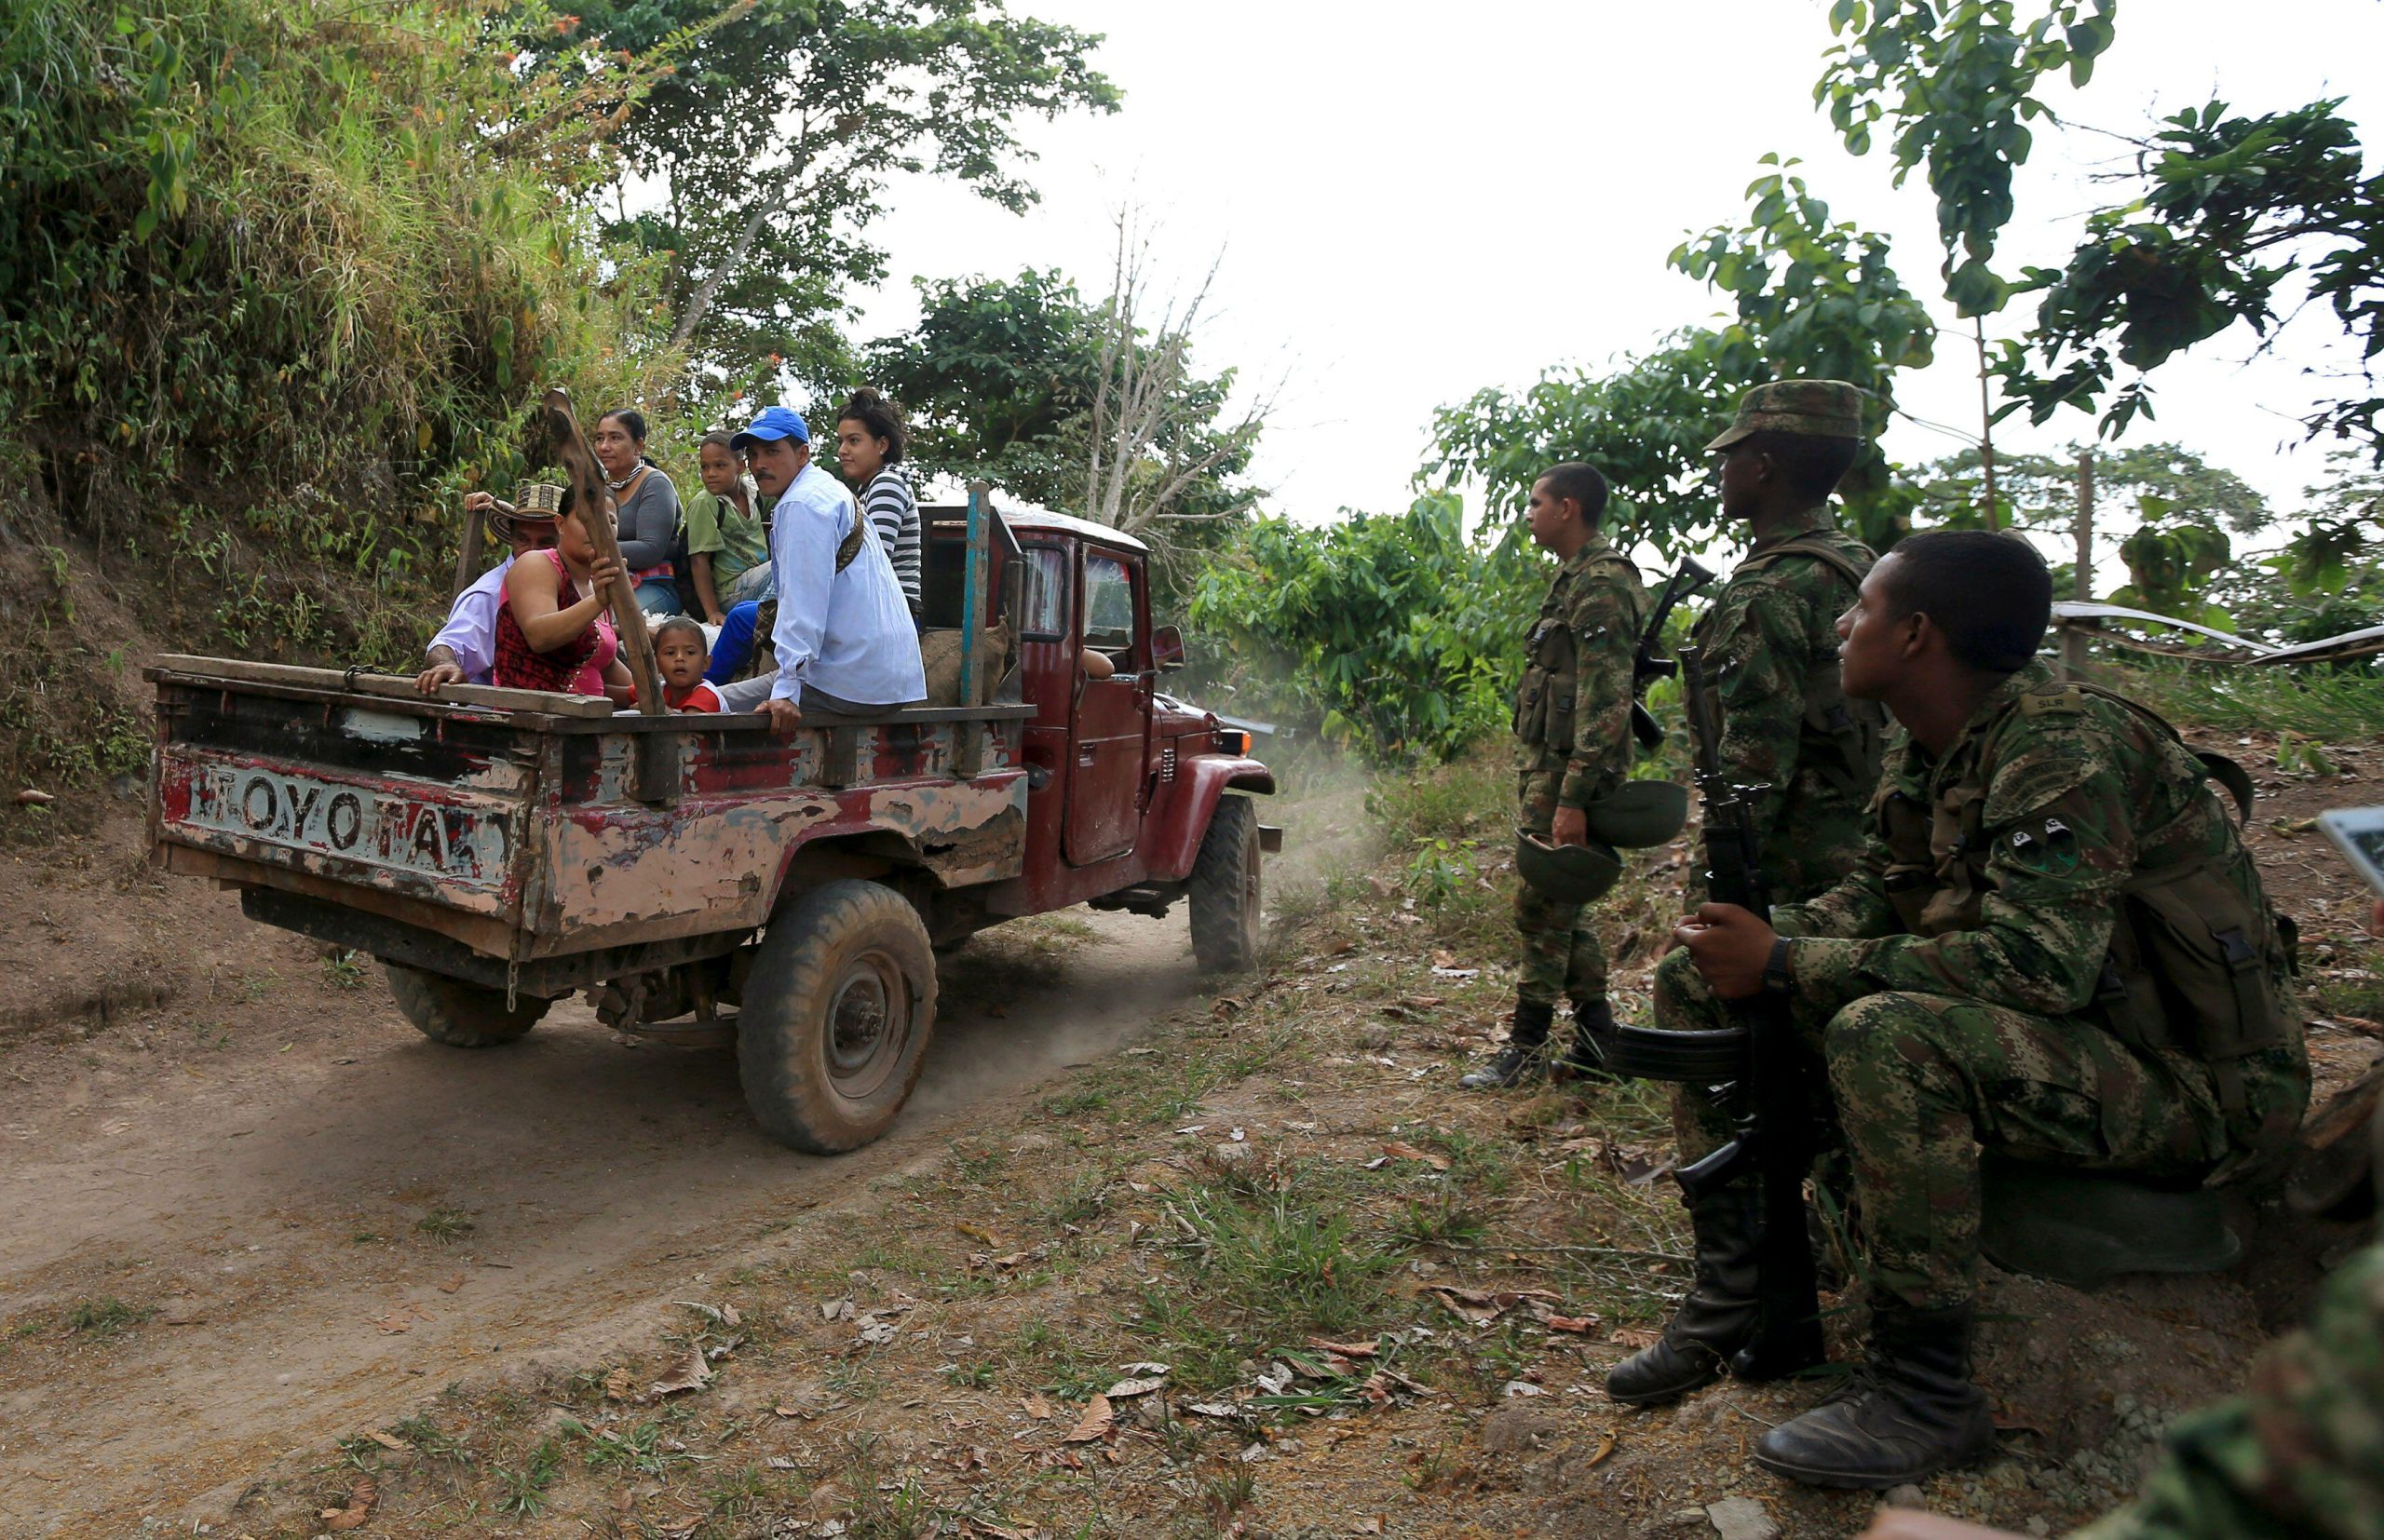 <p>Colombian soldiers stand guard as families displaced by violence return to coffee plantations in Cesar department, many of which were abandoned in 2002 during conflict between the government and FARC rebels. Research has sought to explore the links between control and use of natural resources and armed conflict in country. (Image: José Gomez / Alamy)</p>